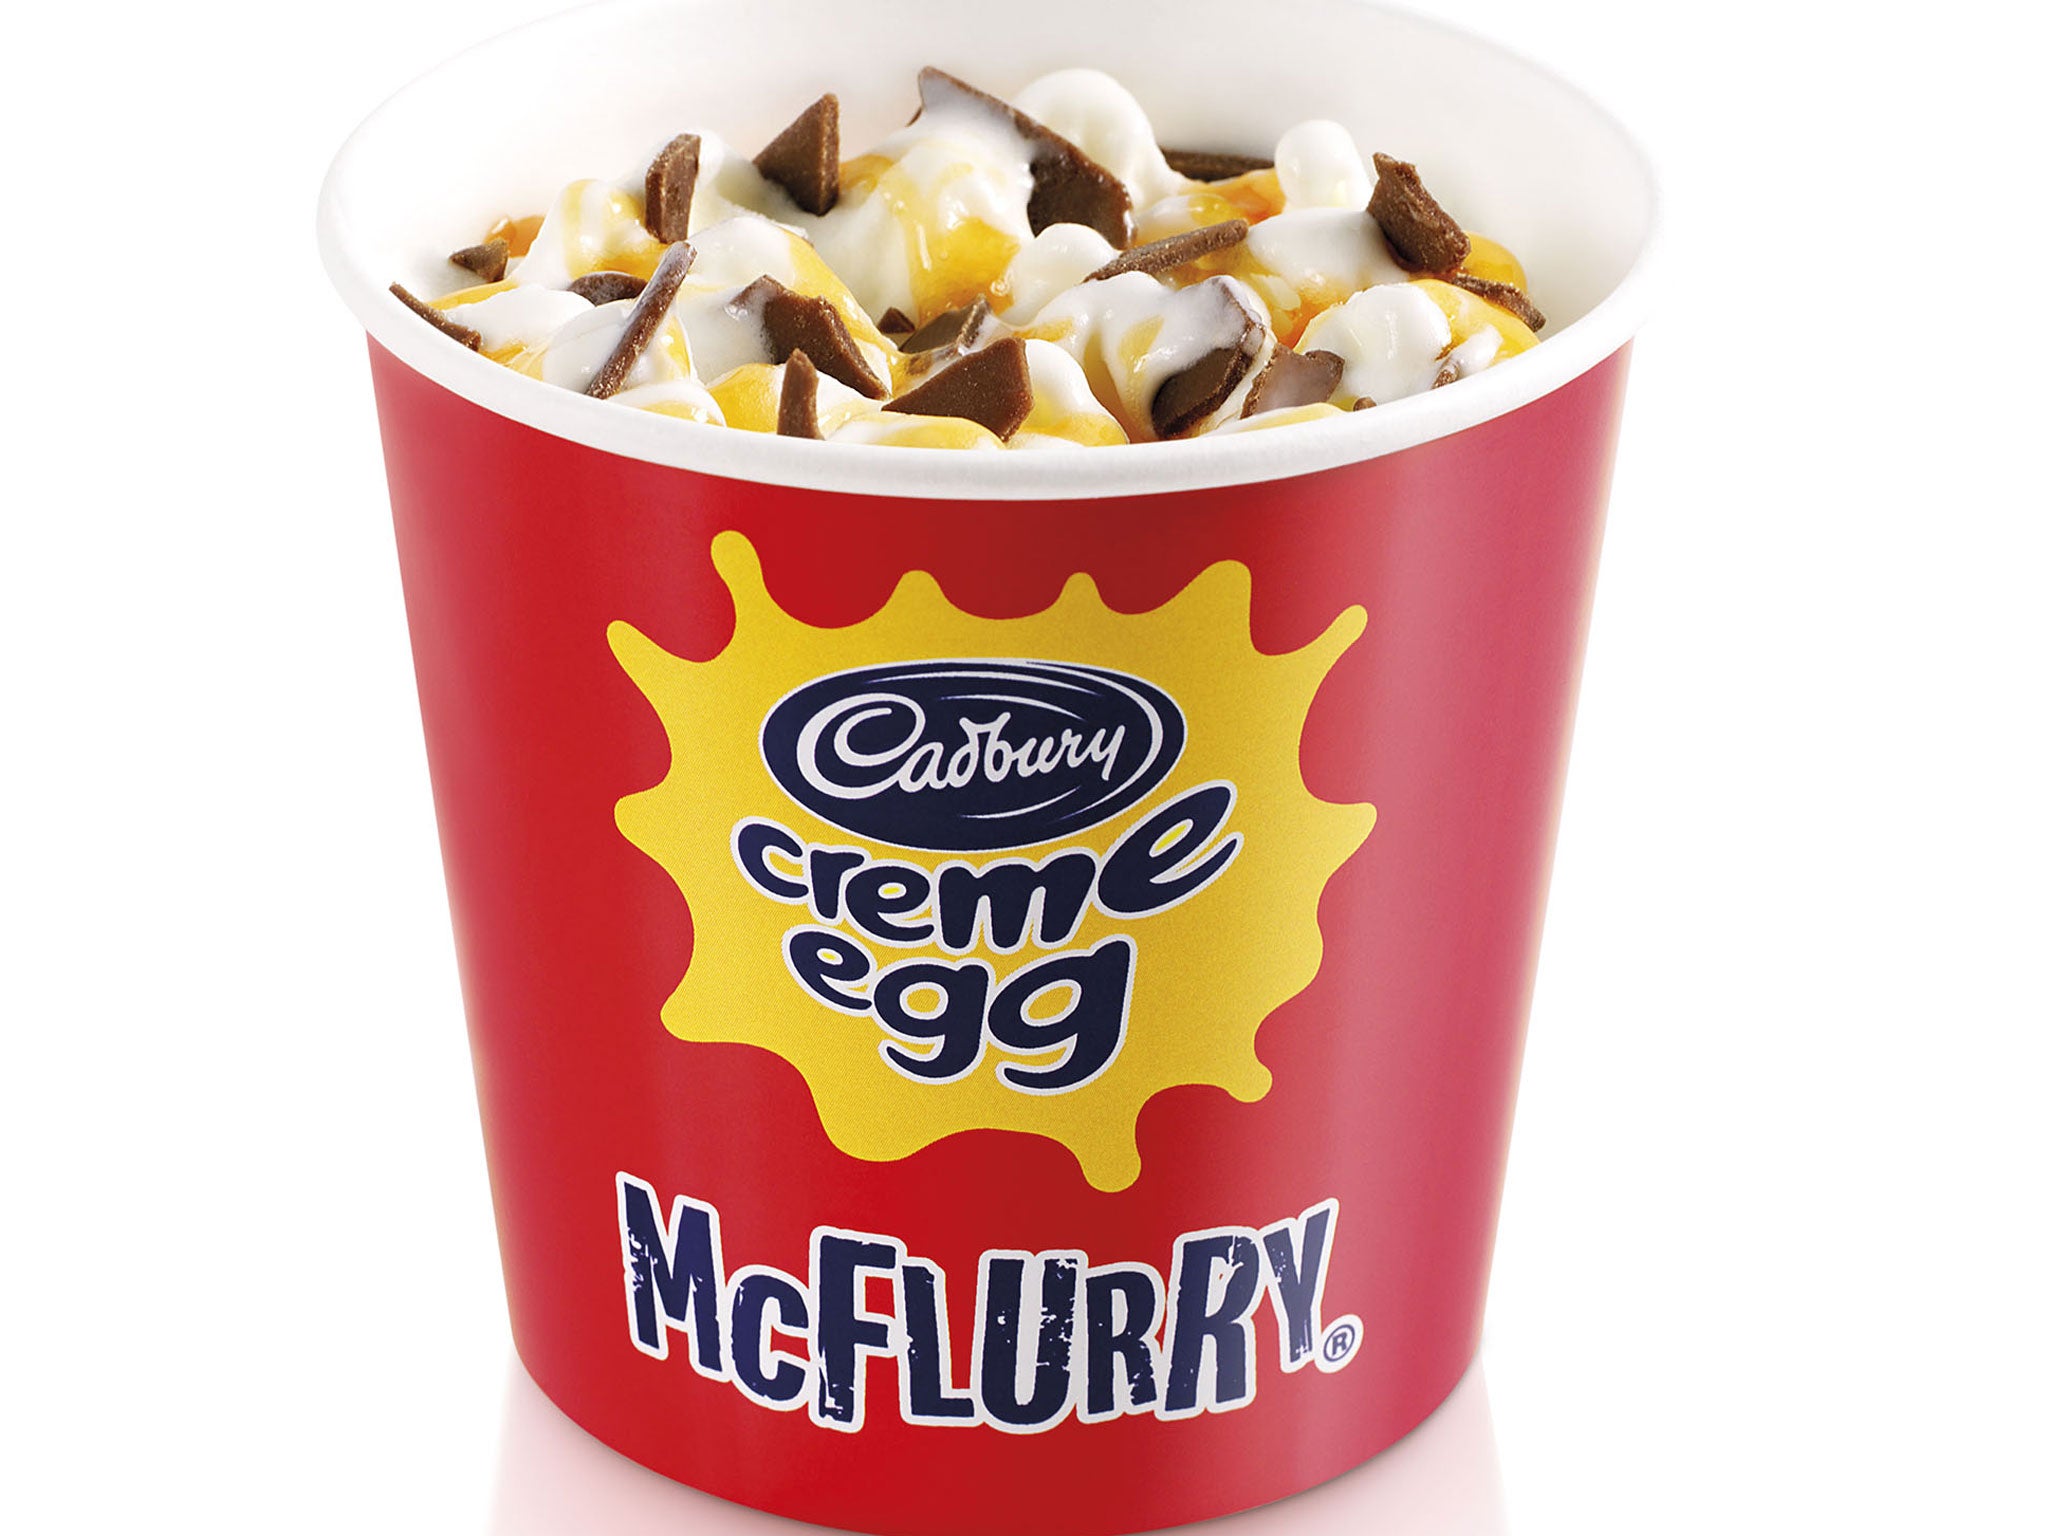 The fast-food giant has launched the limited product in Australia on Monday for the first time,